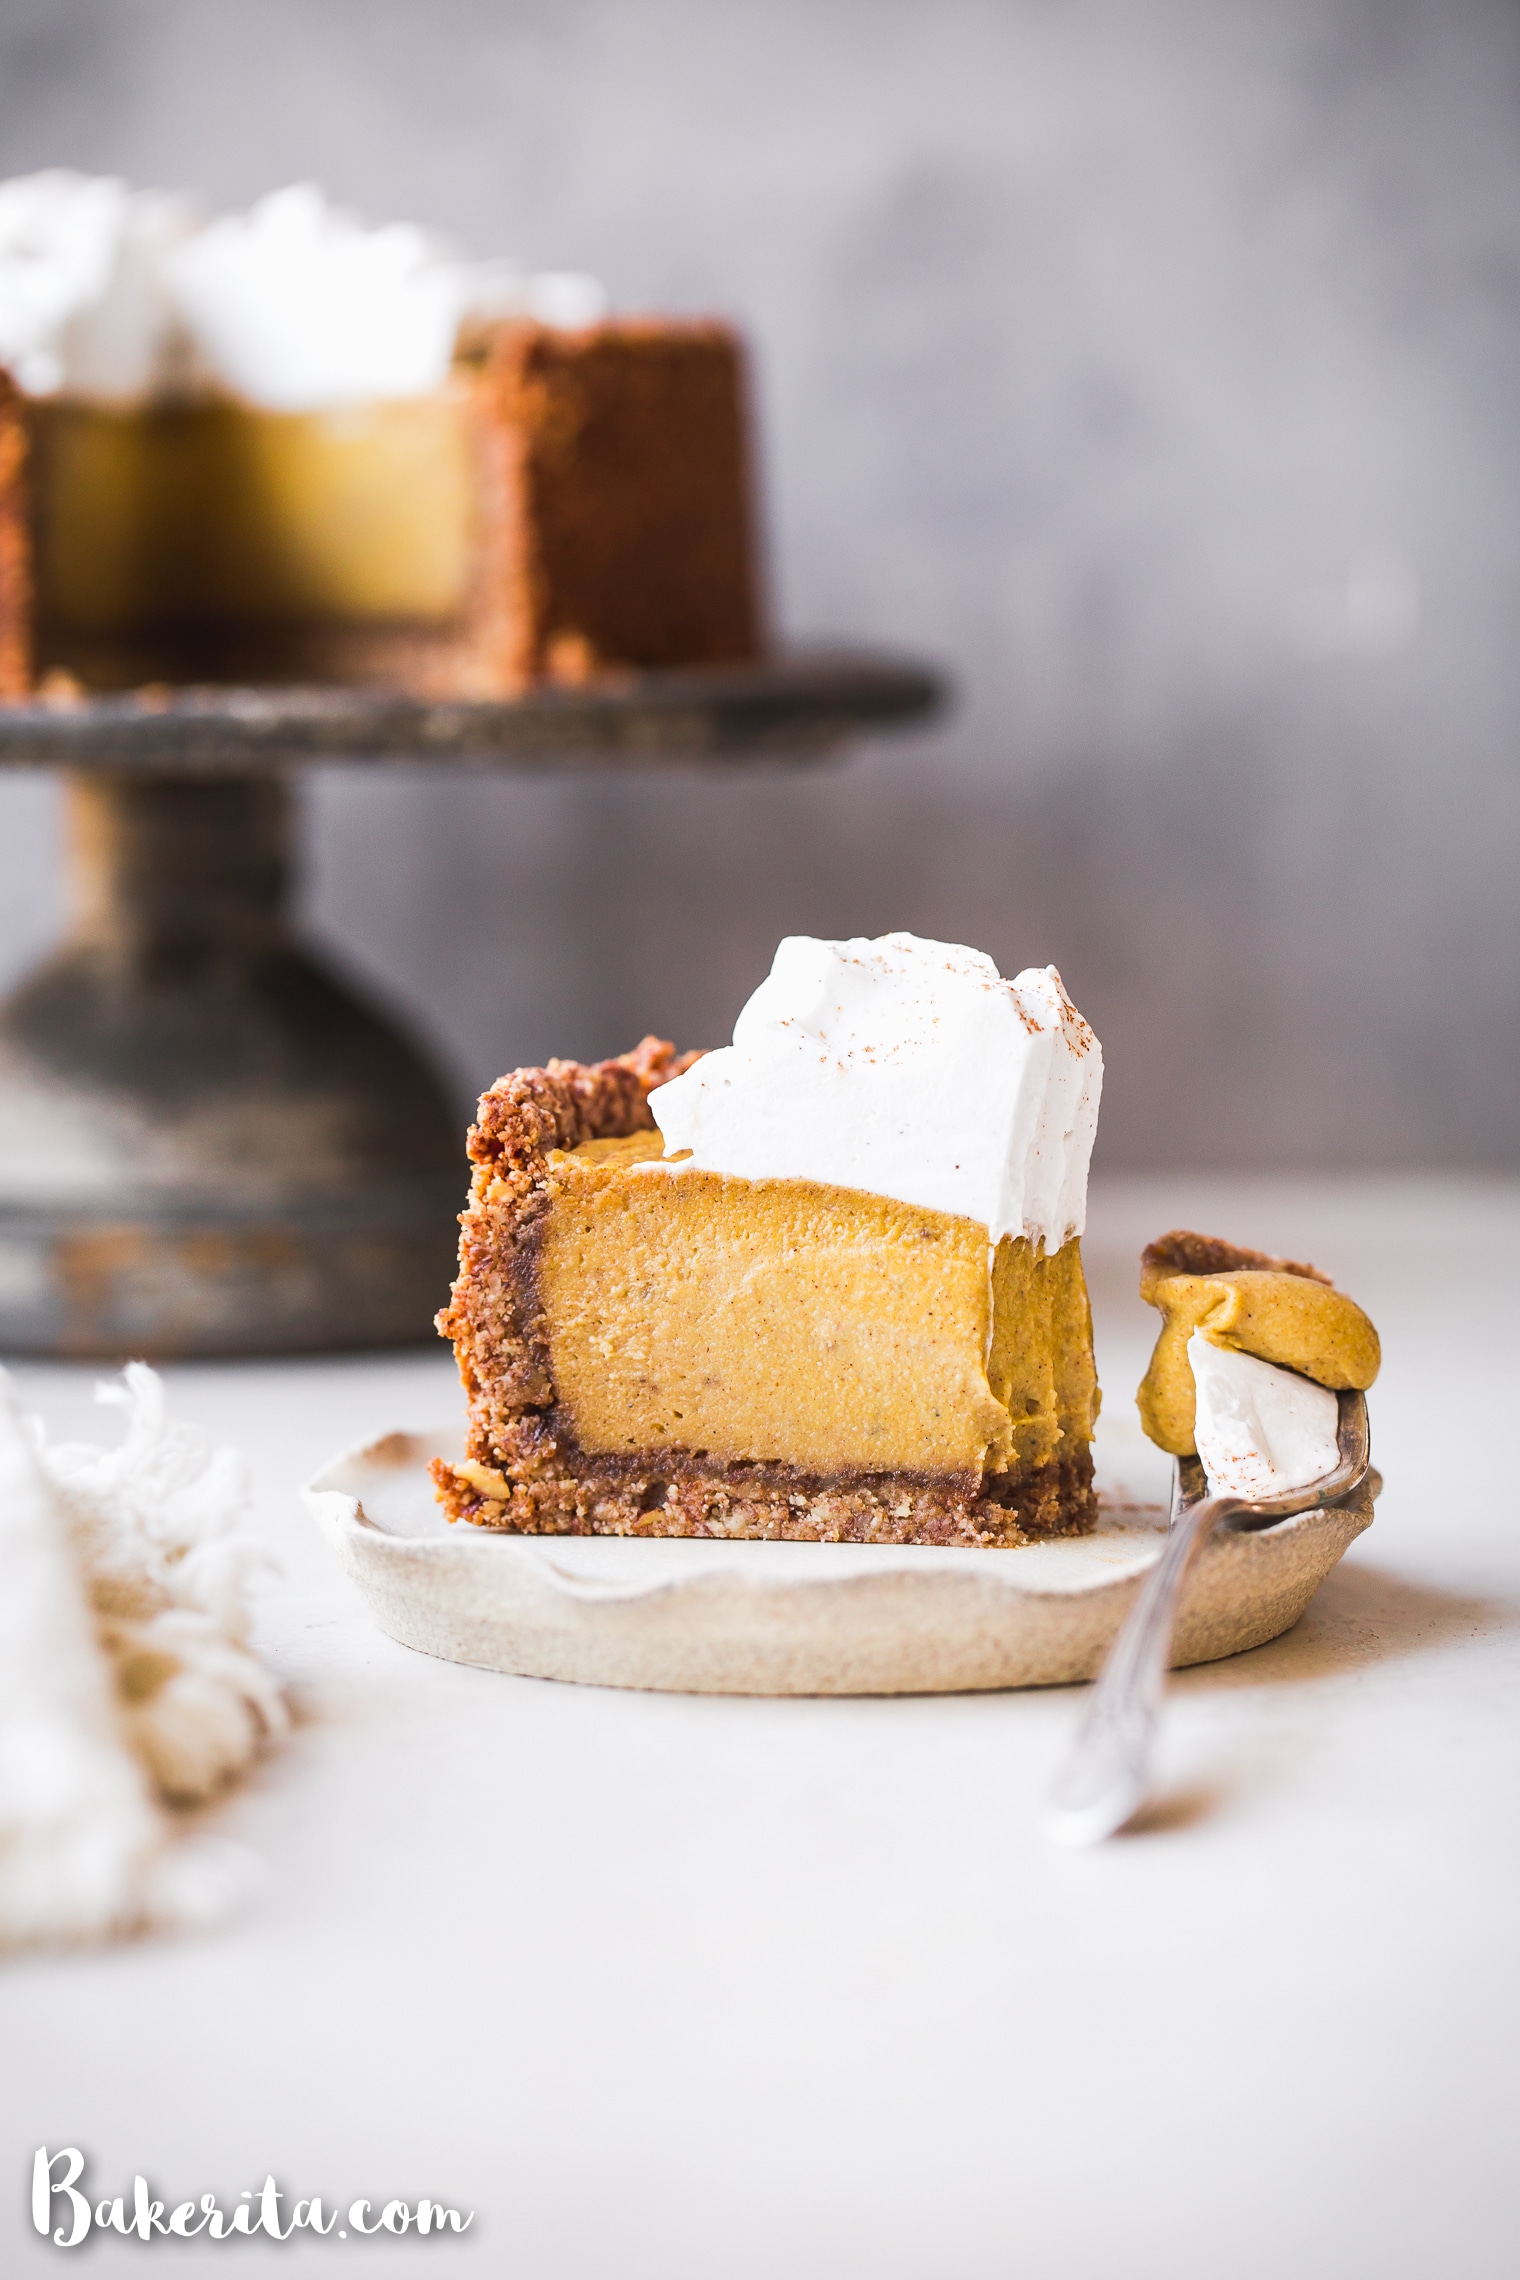 This Baked Vegan Pumpkin Cheesecake will wow you with its rich texture, spices, and graham cracker style crust. It's the perfect vegan Thanksgiving dessert.